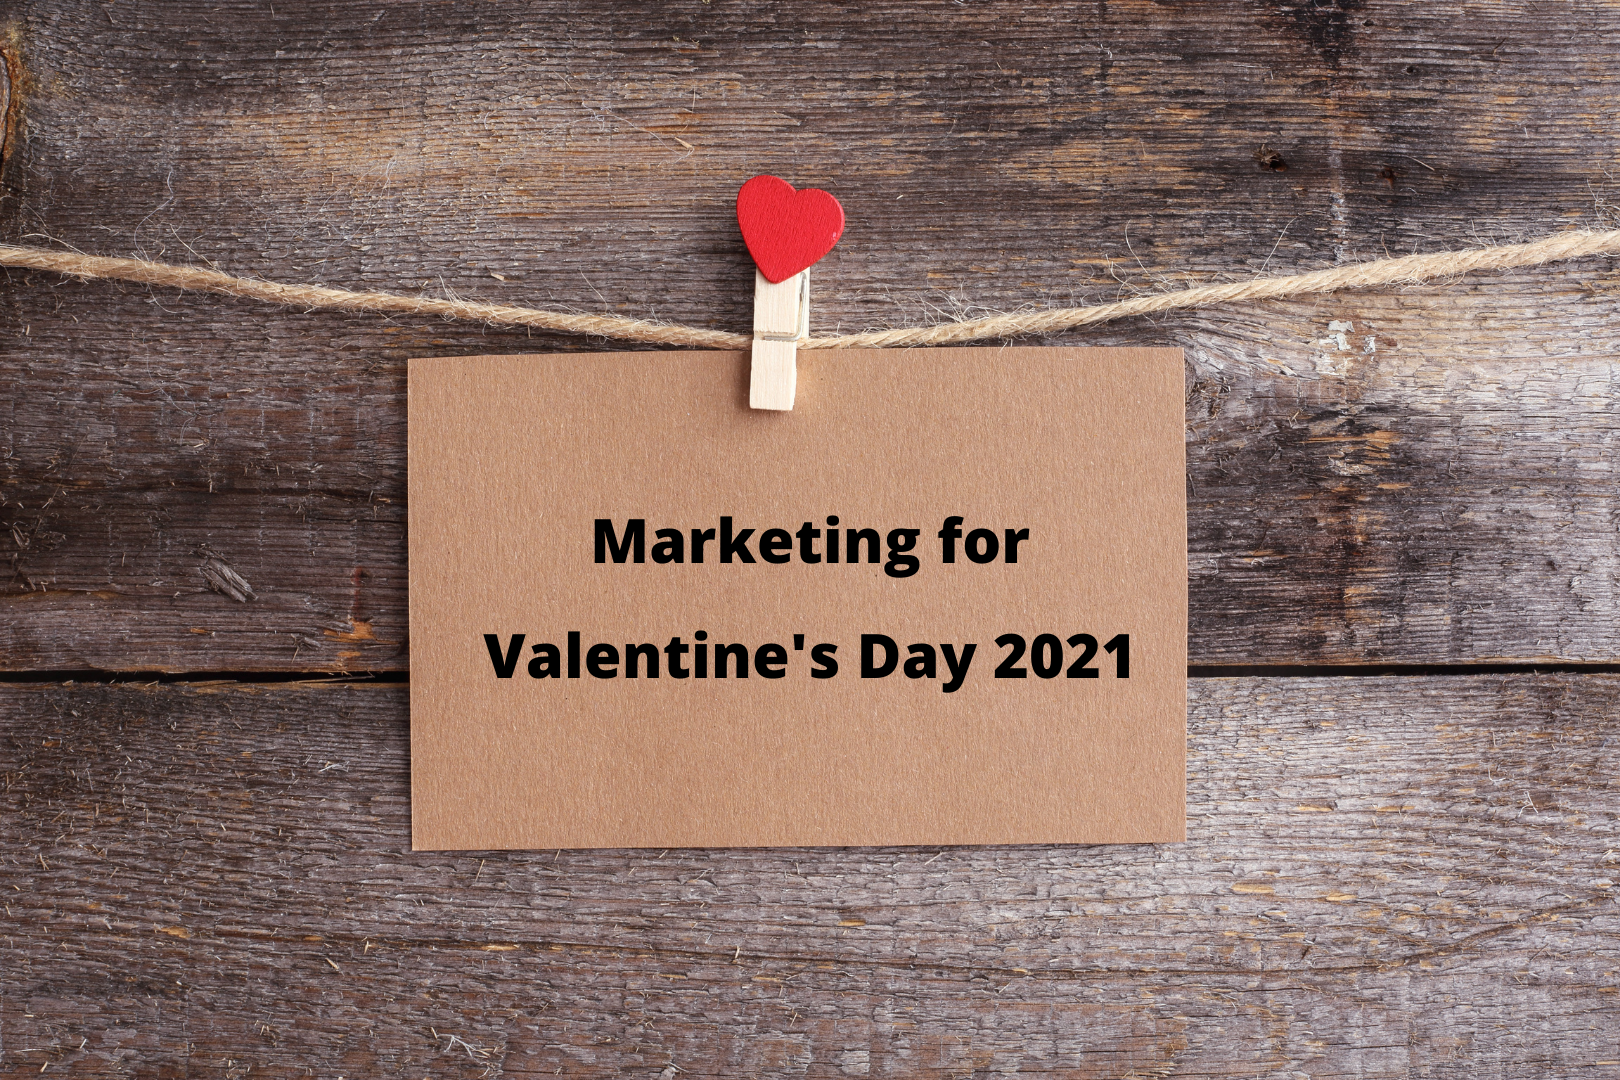 How to Win Valentine’s Day with Brand Activations